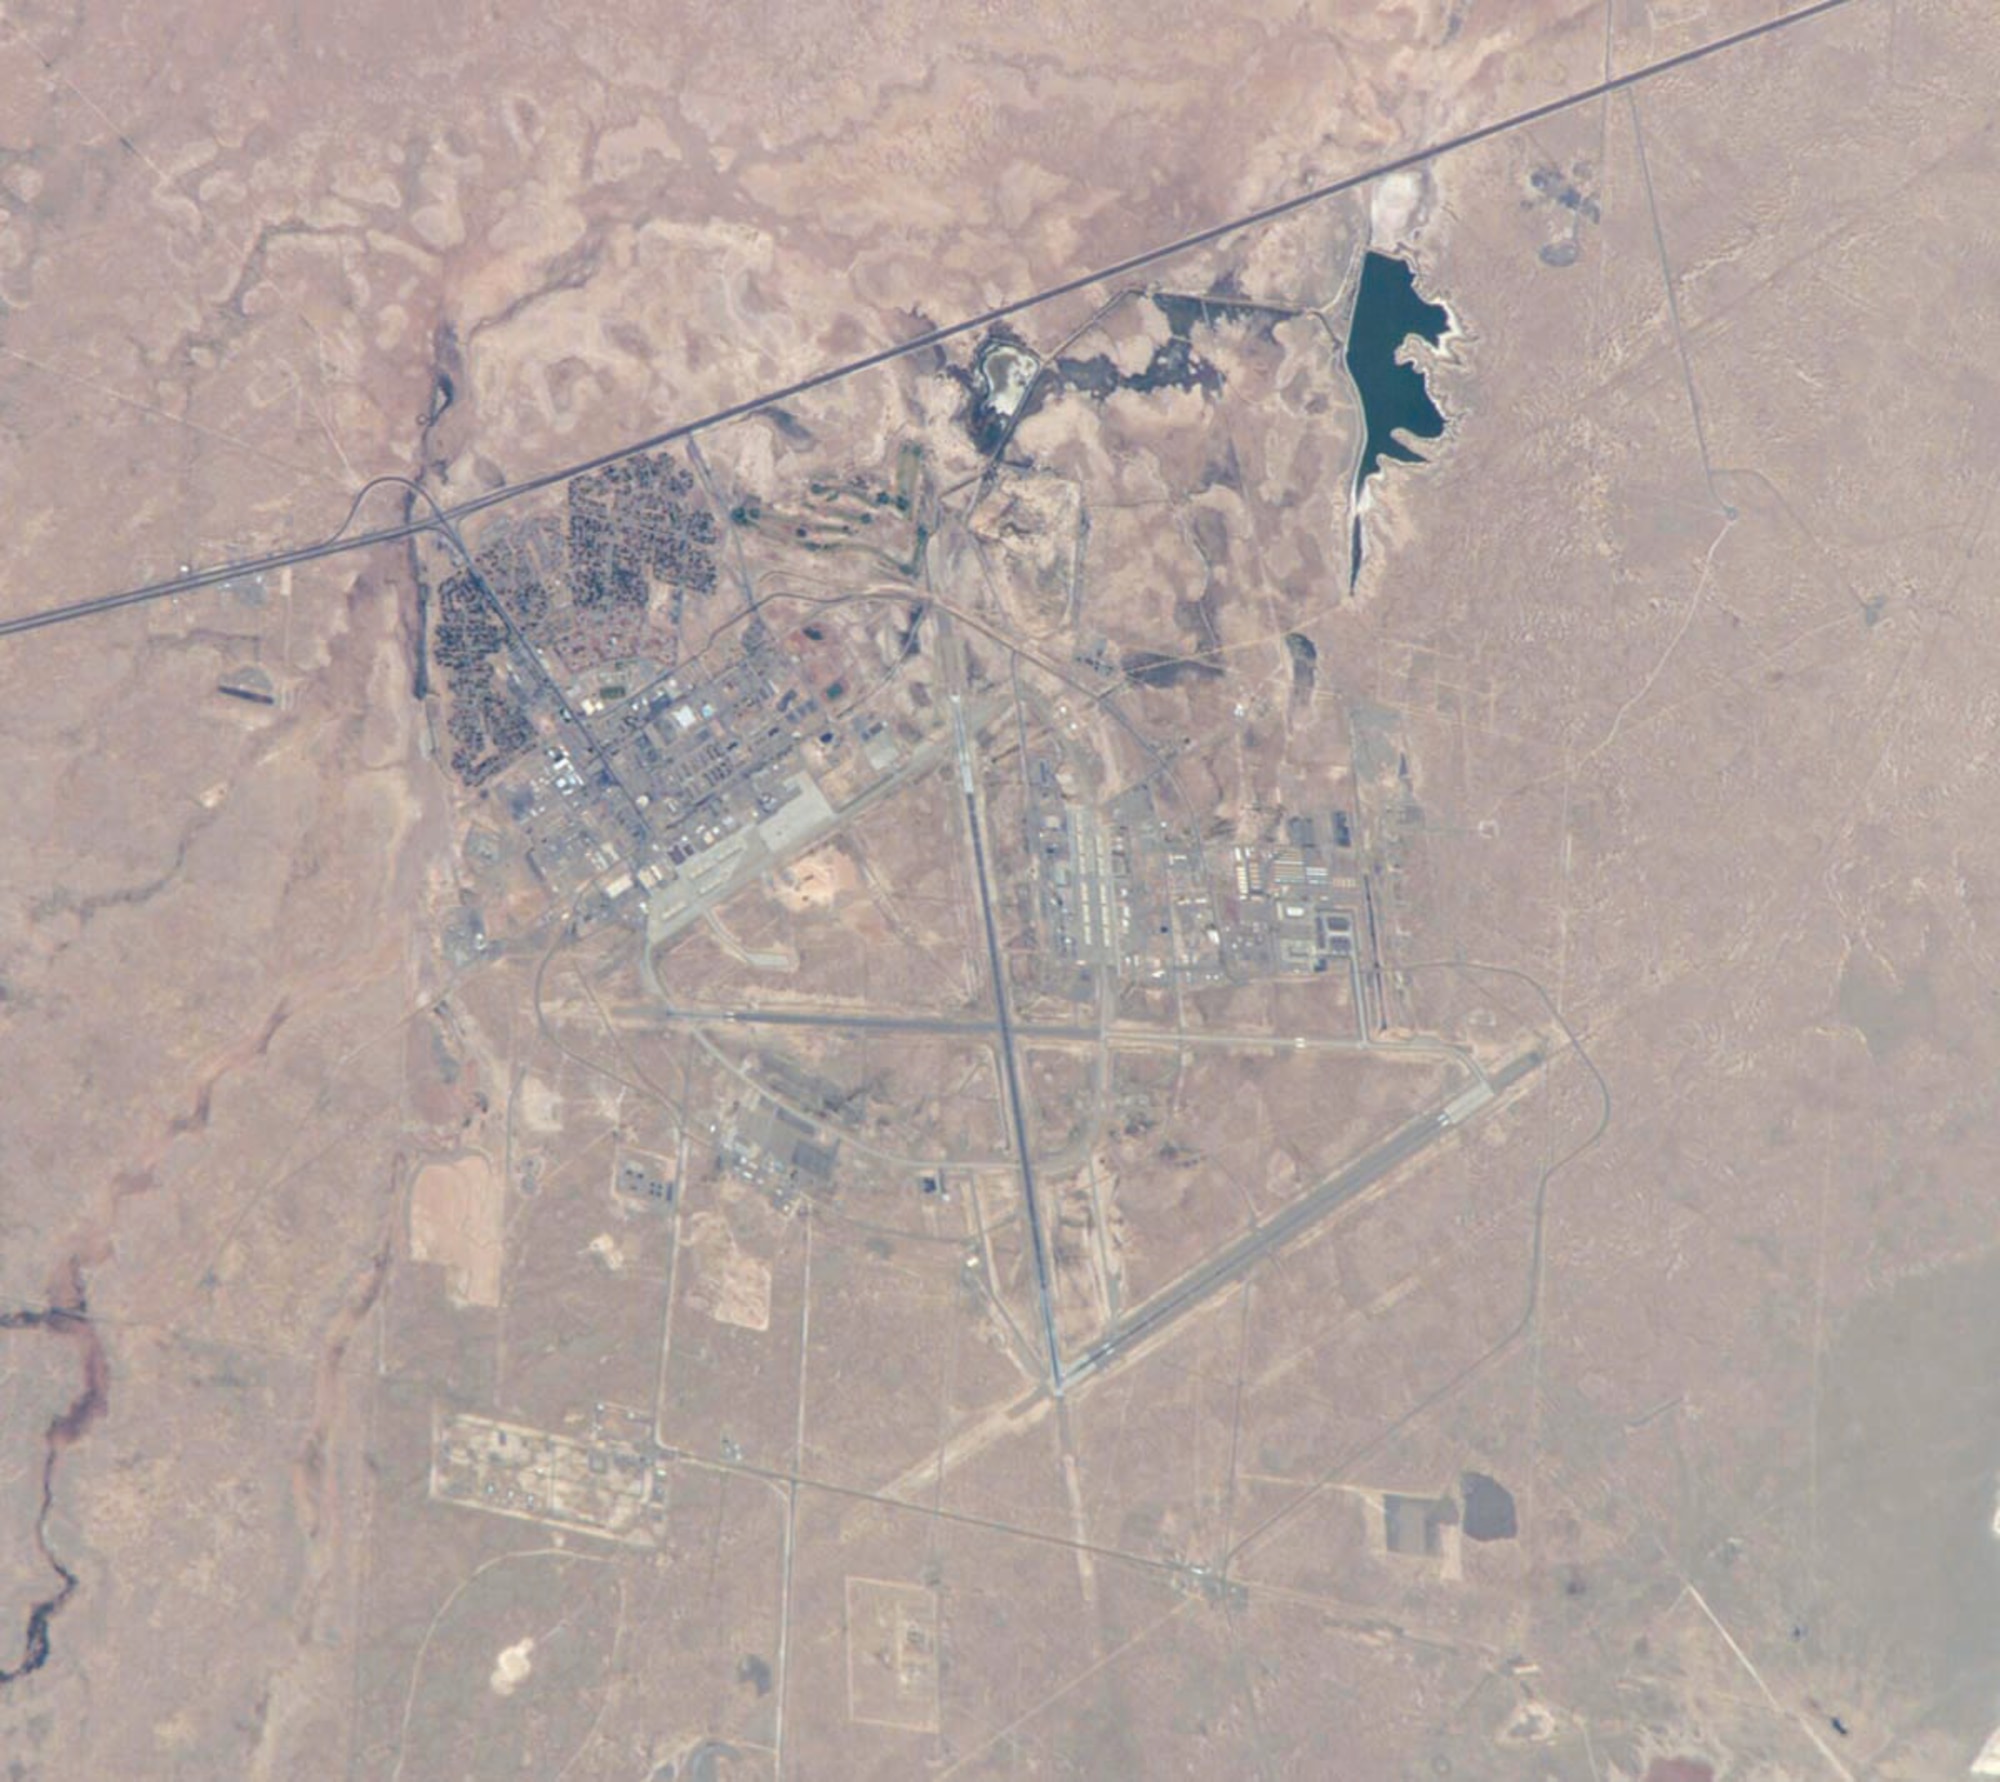 Holloman from ISS